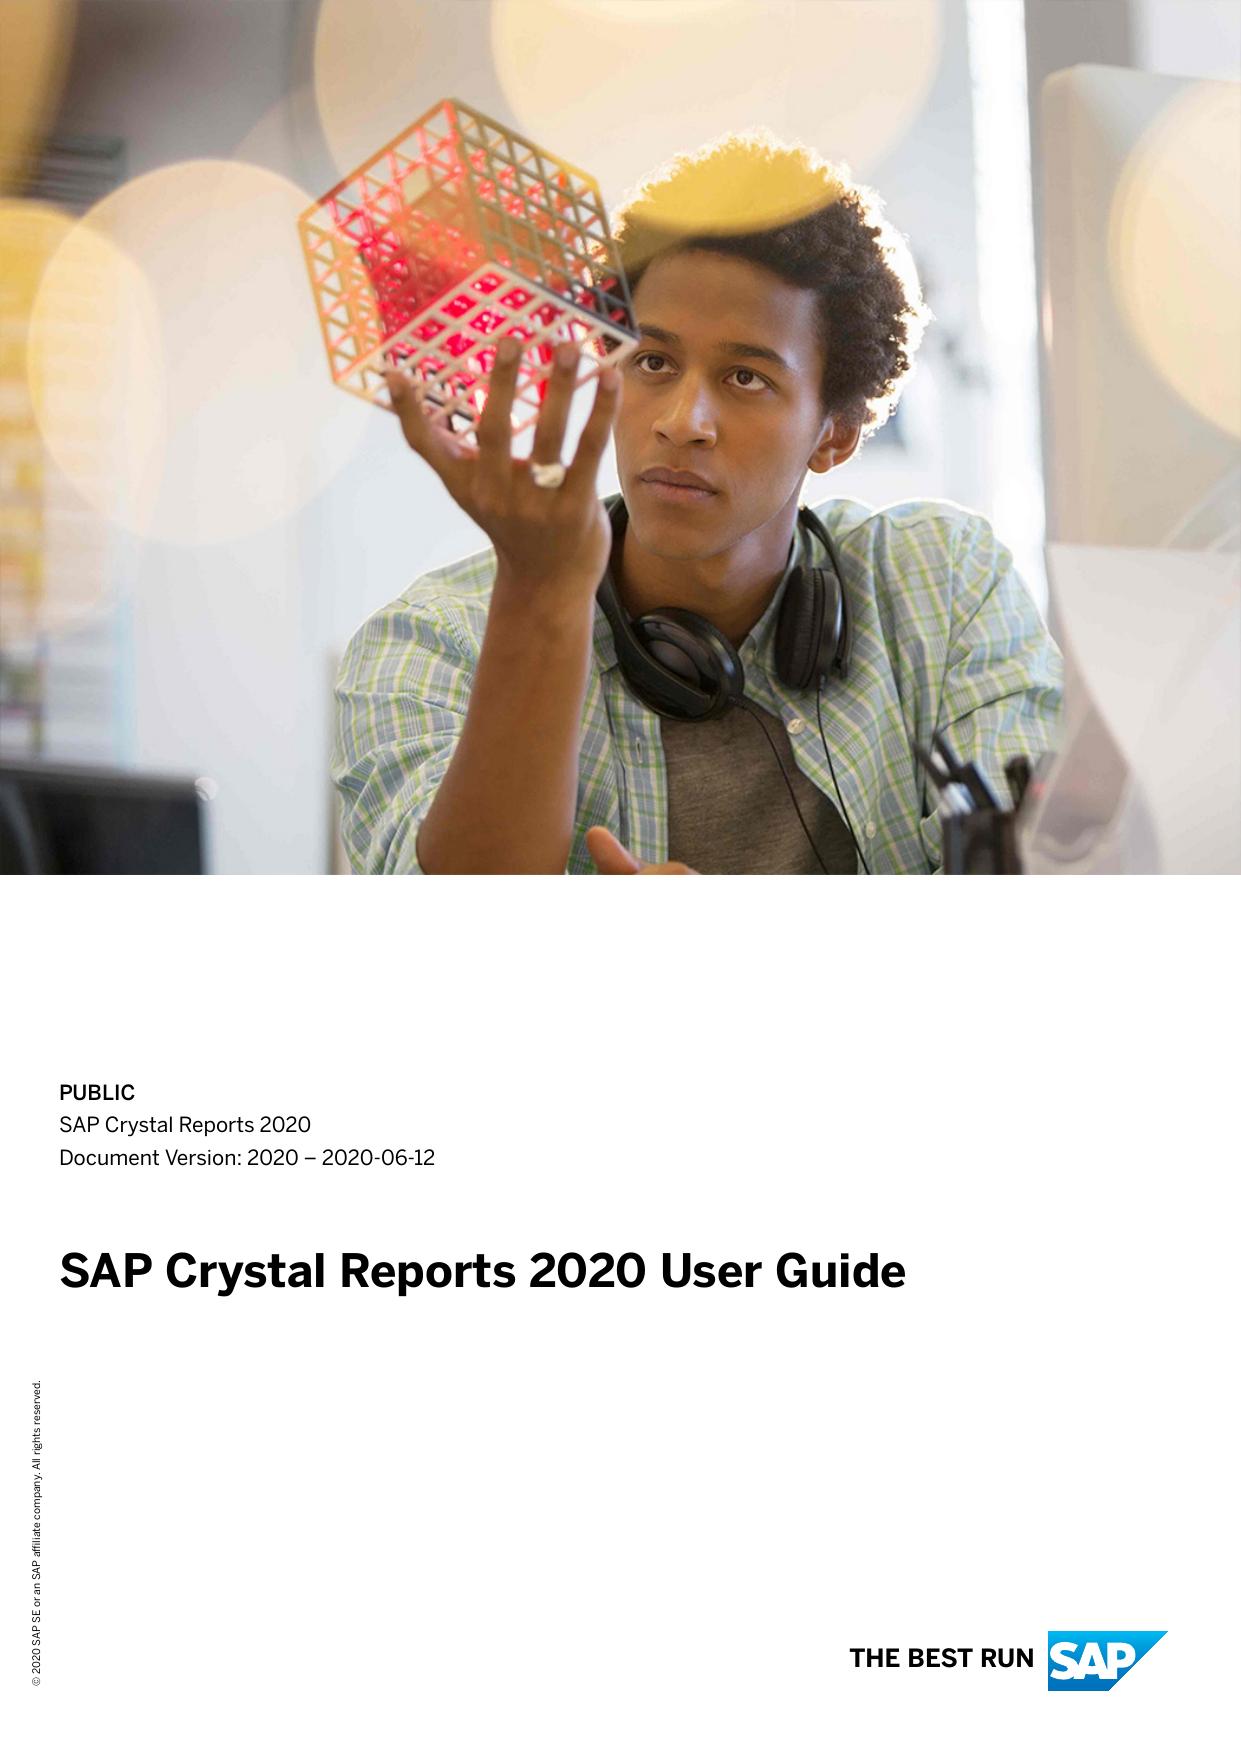 SAP Crystal Reports 2020 User Guide